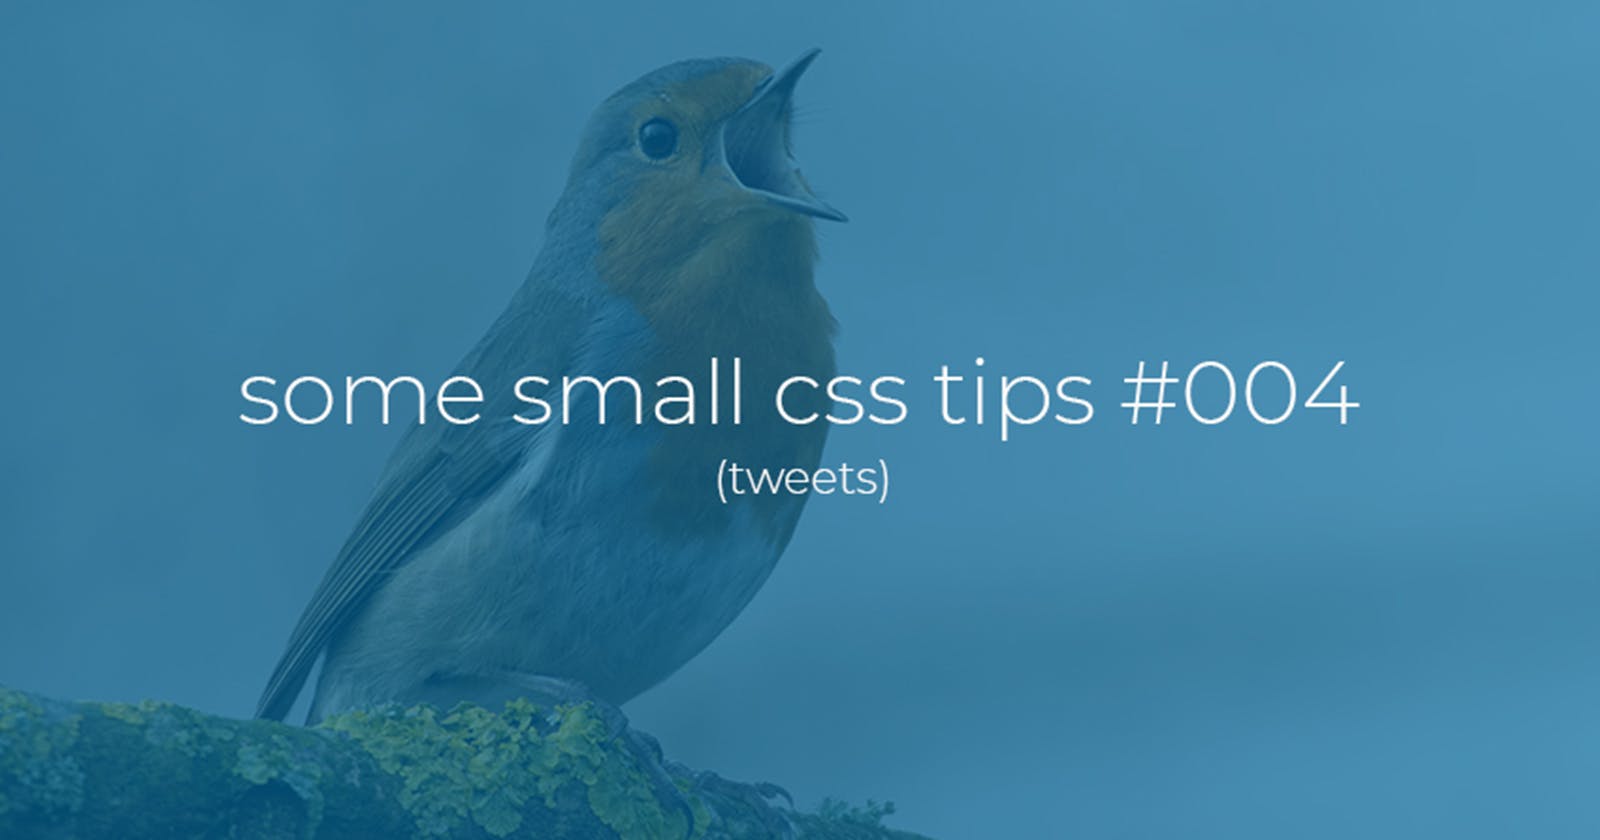 Some small css tips #004